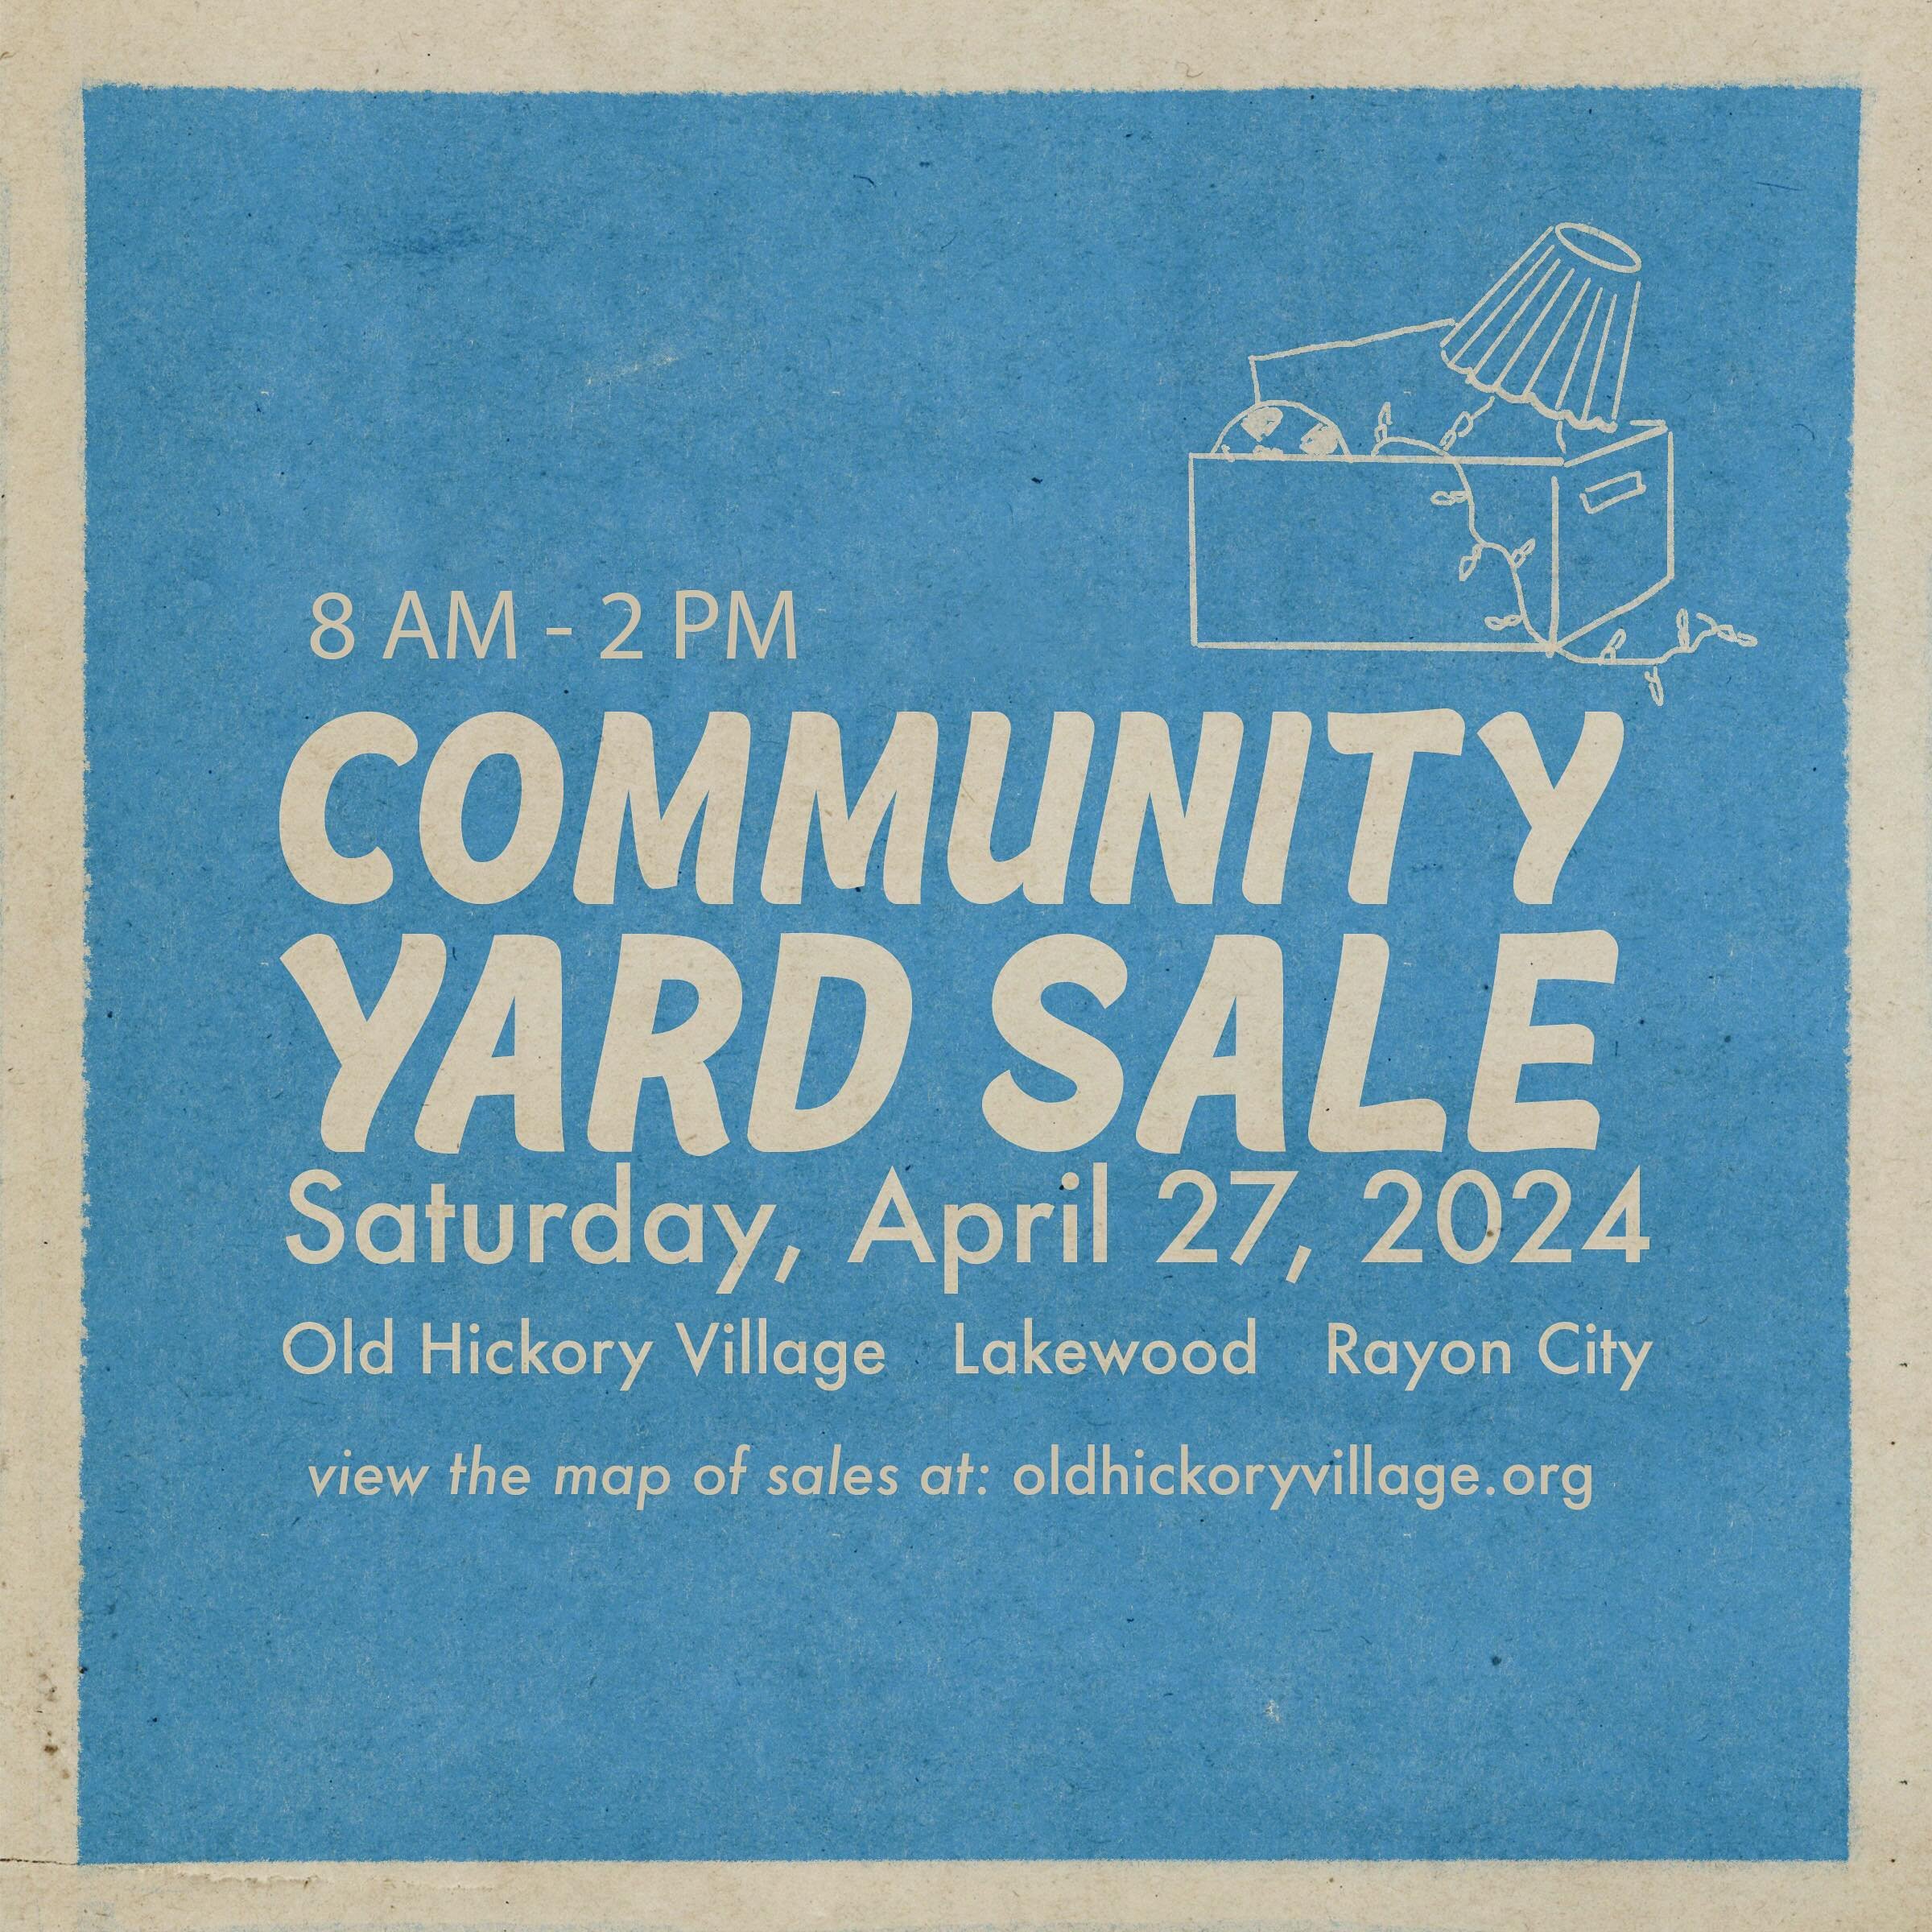 Our annual community yard sale is this Saturday, April 27. Over 60 people have signed up! Plus our friends at @nowatnpl.oldhickory, @southerncrystalco, and Old Hickory United Methodist Church @oldhickorymethodistchurchtn will be participating. Link i